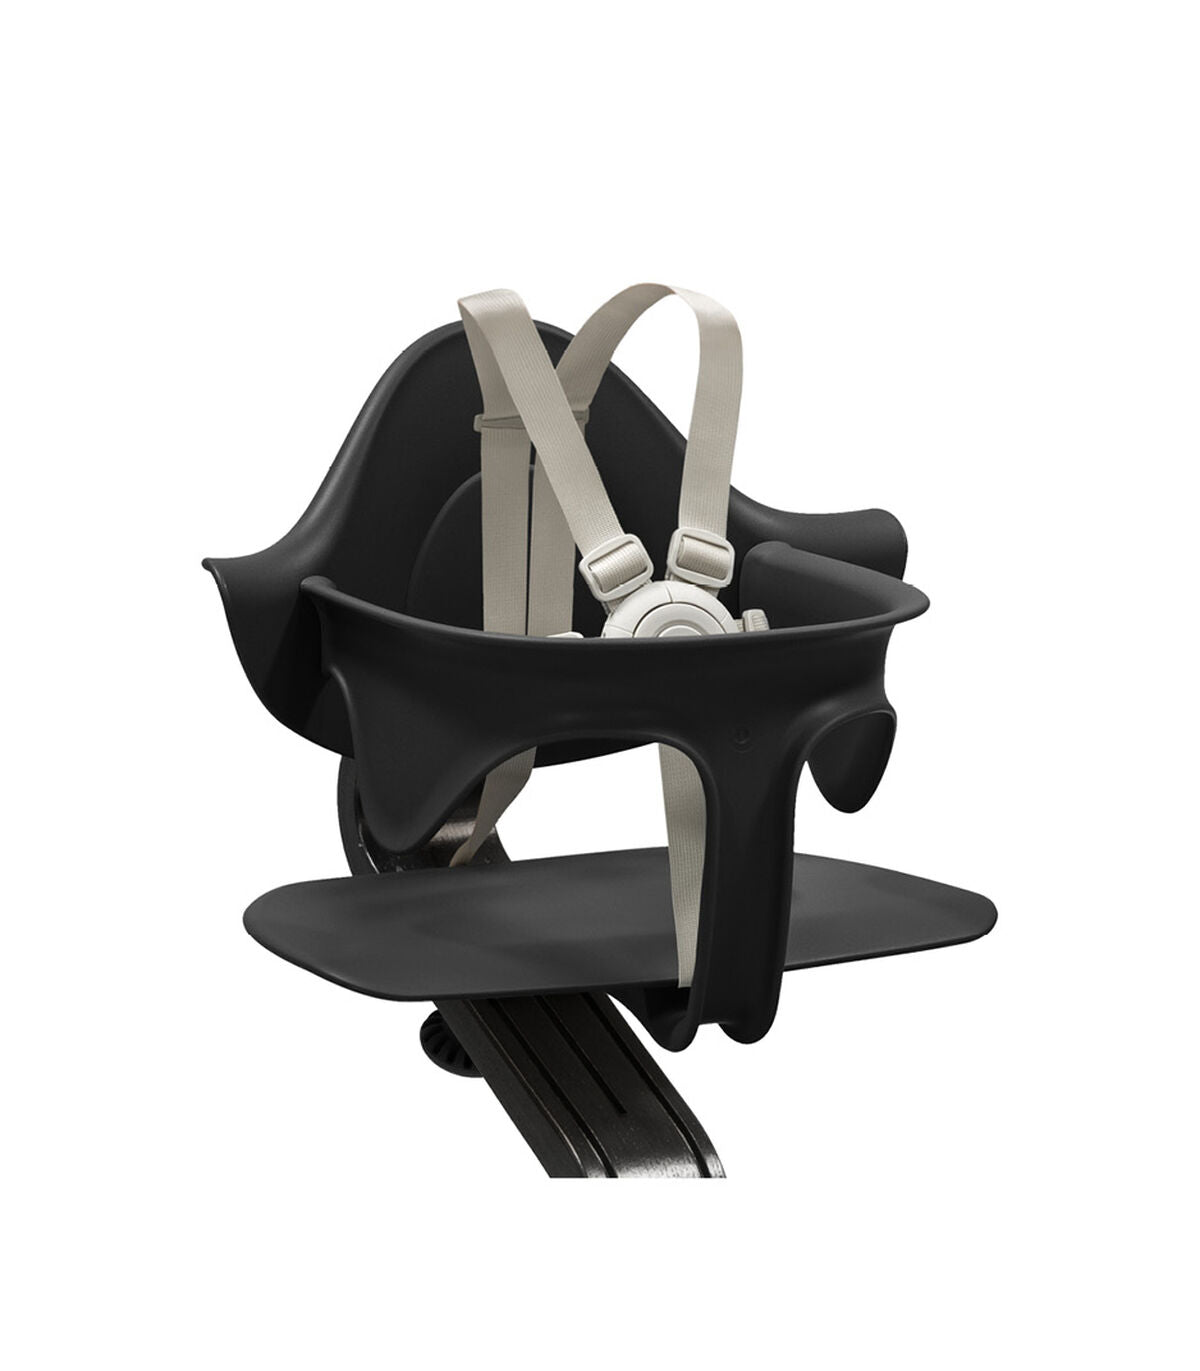 STOKKE Nomi Chair - ANB Baby -5712476004882$100 - $300